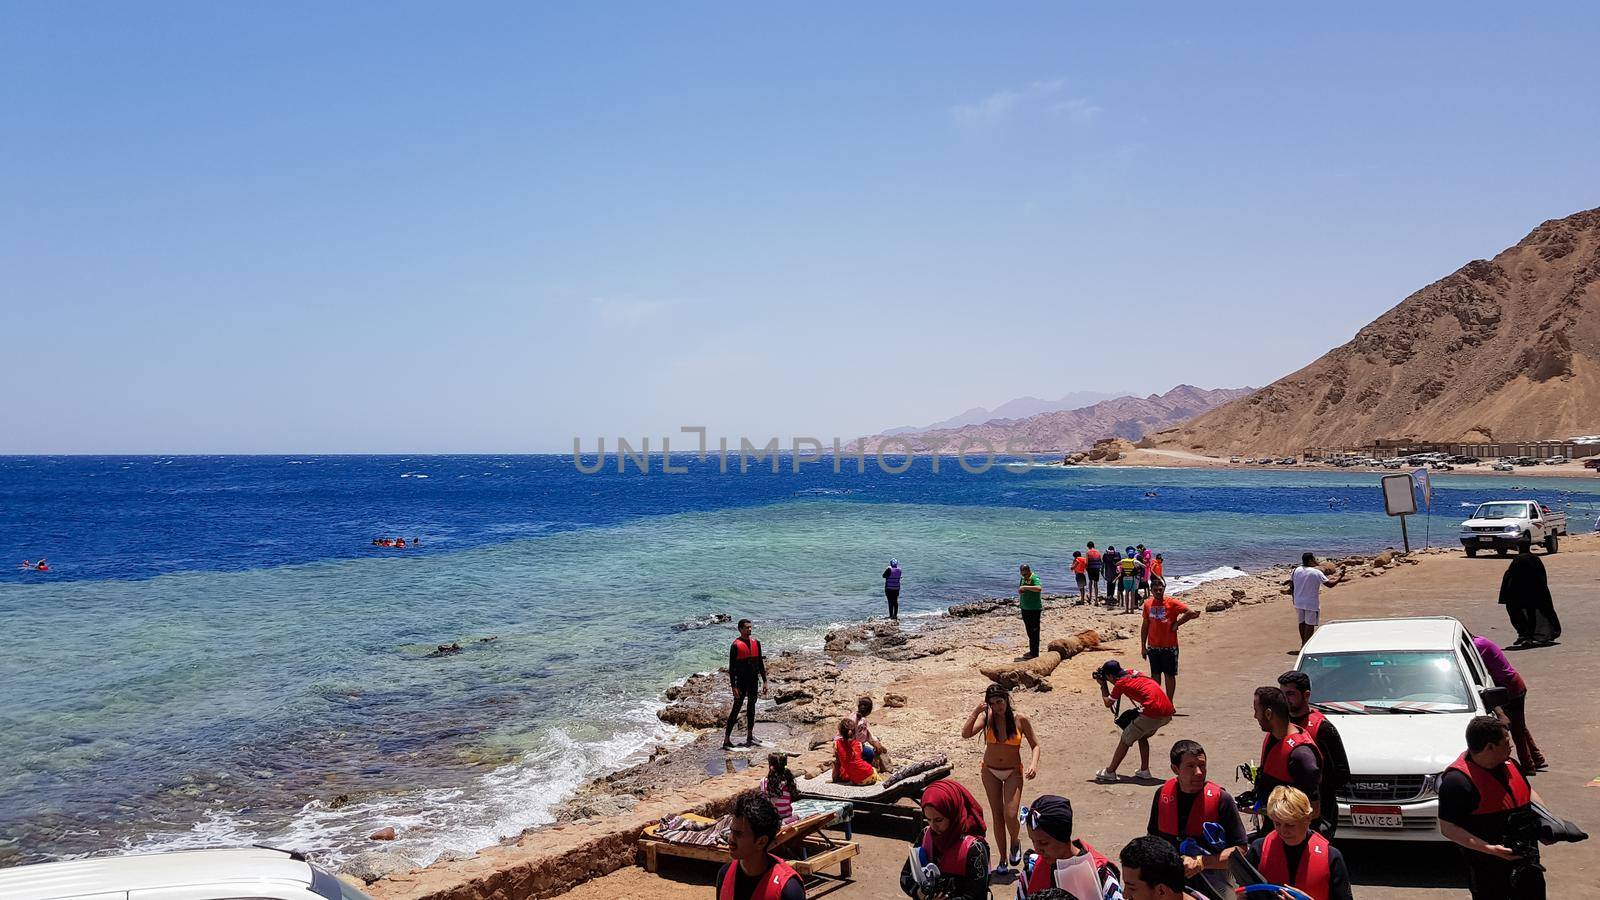 Egypt, Dahab - October 17, 2019: The Blue Hole is a popular diving spot in East Sinai. Sunny beach resort on the Red Sea in Dahab. A famous tourist destination near Sharm el Sheikh. Bright sunshine by Roshchyn